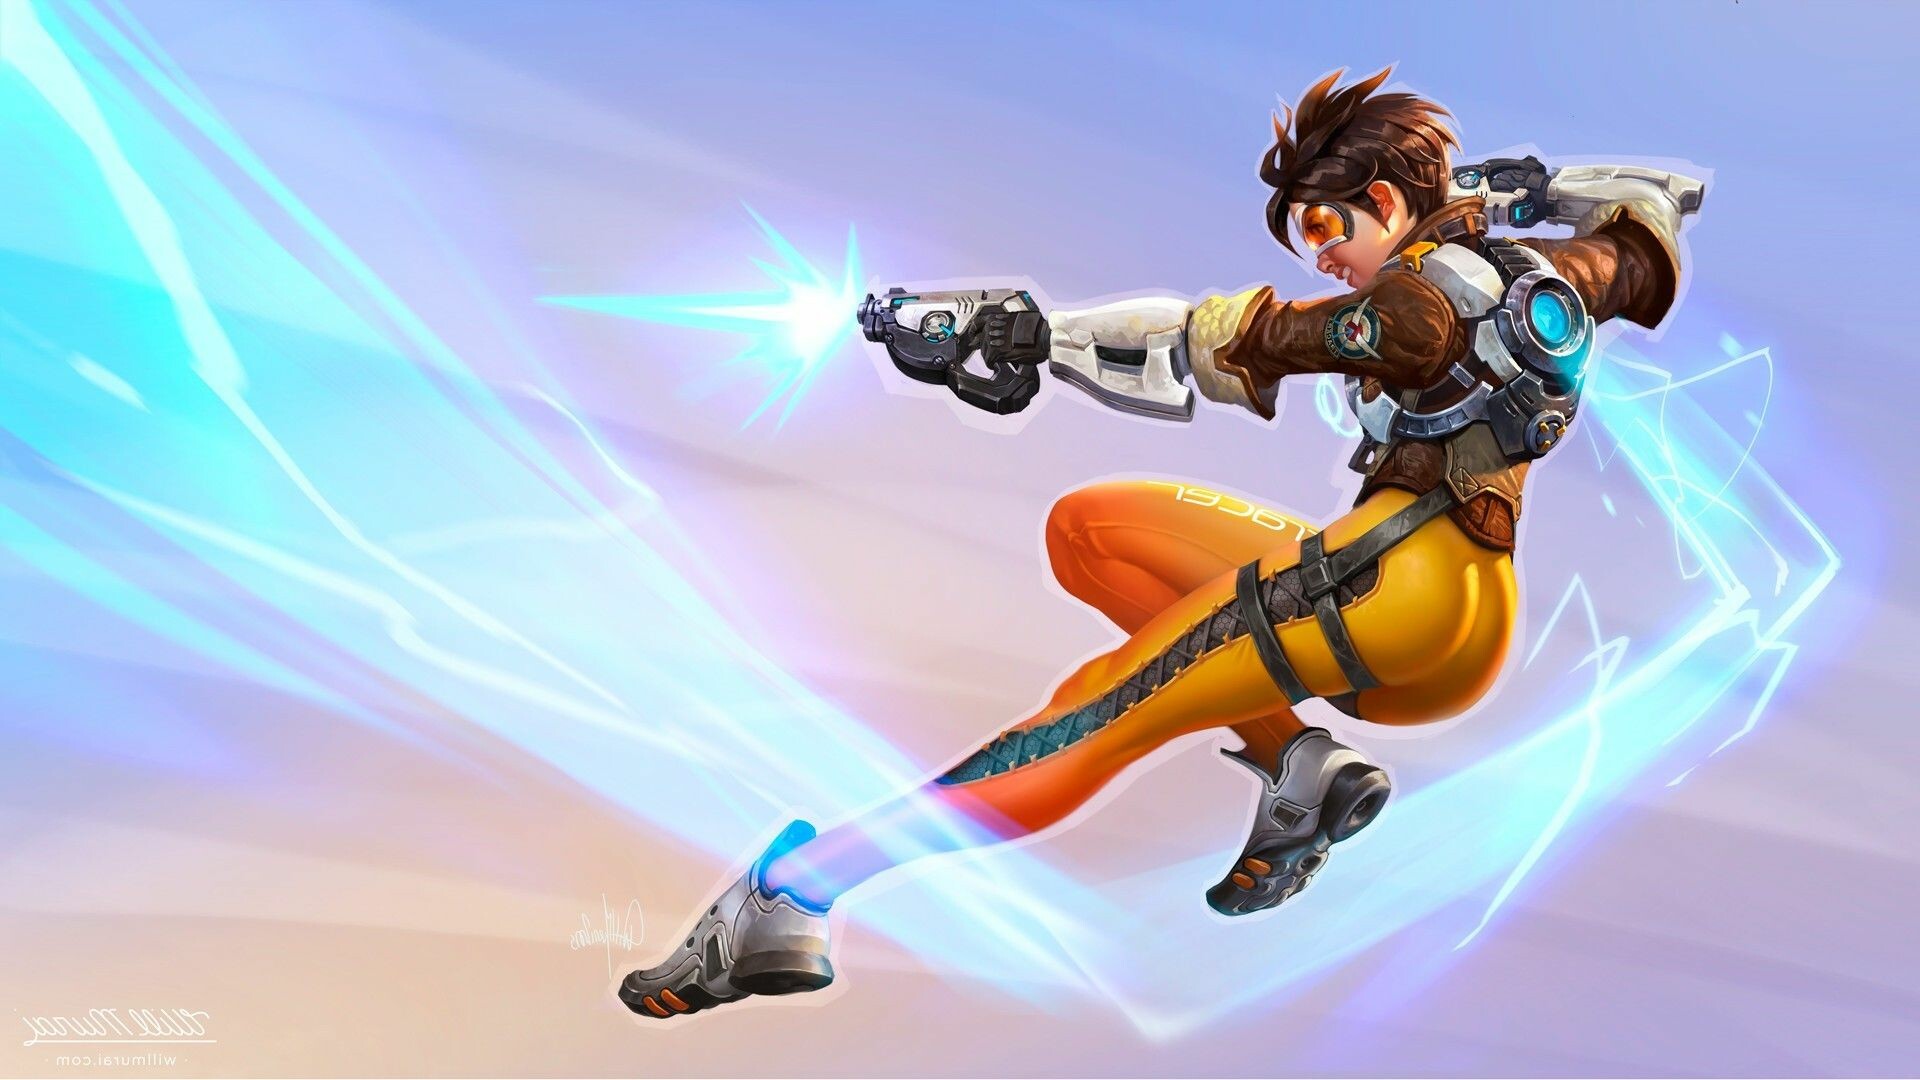 Overwatch: Tracer, A Damage hero, Lena Oxton, Illustration. 1920x1080 Full HD Background.